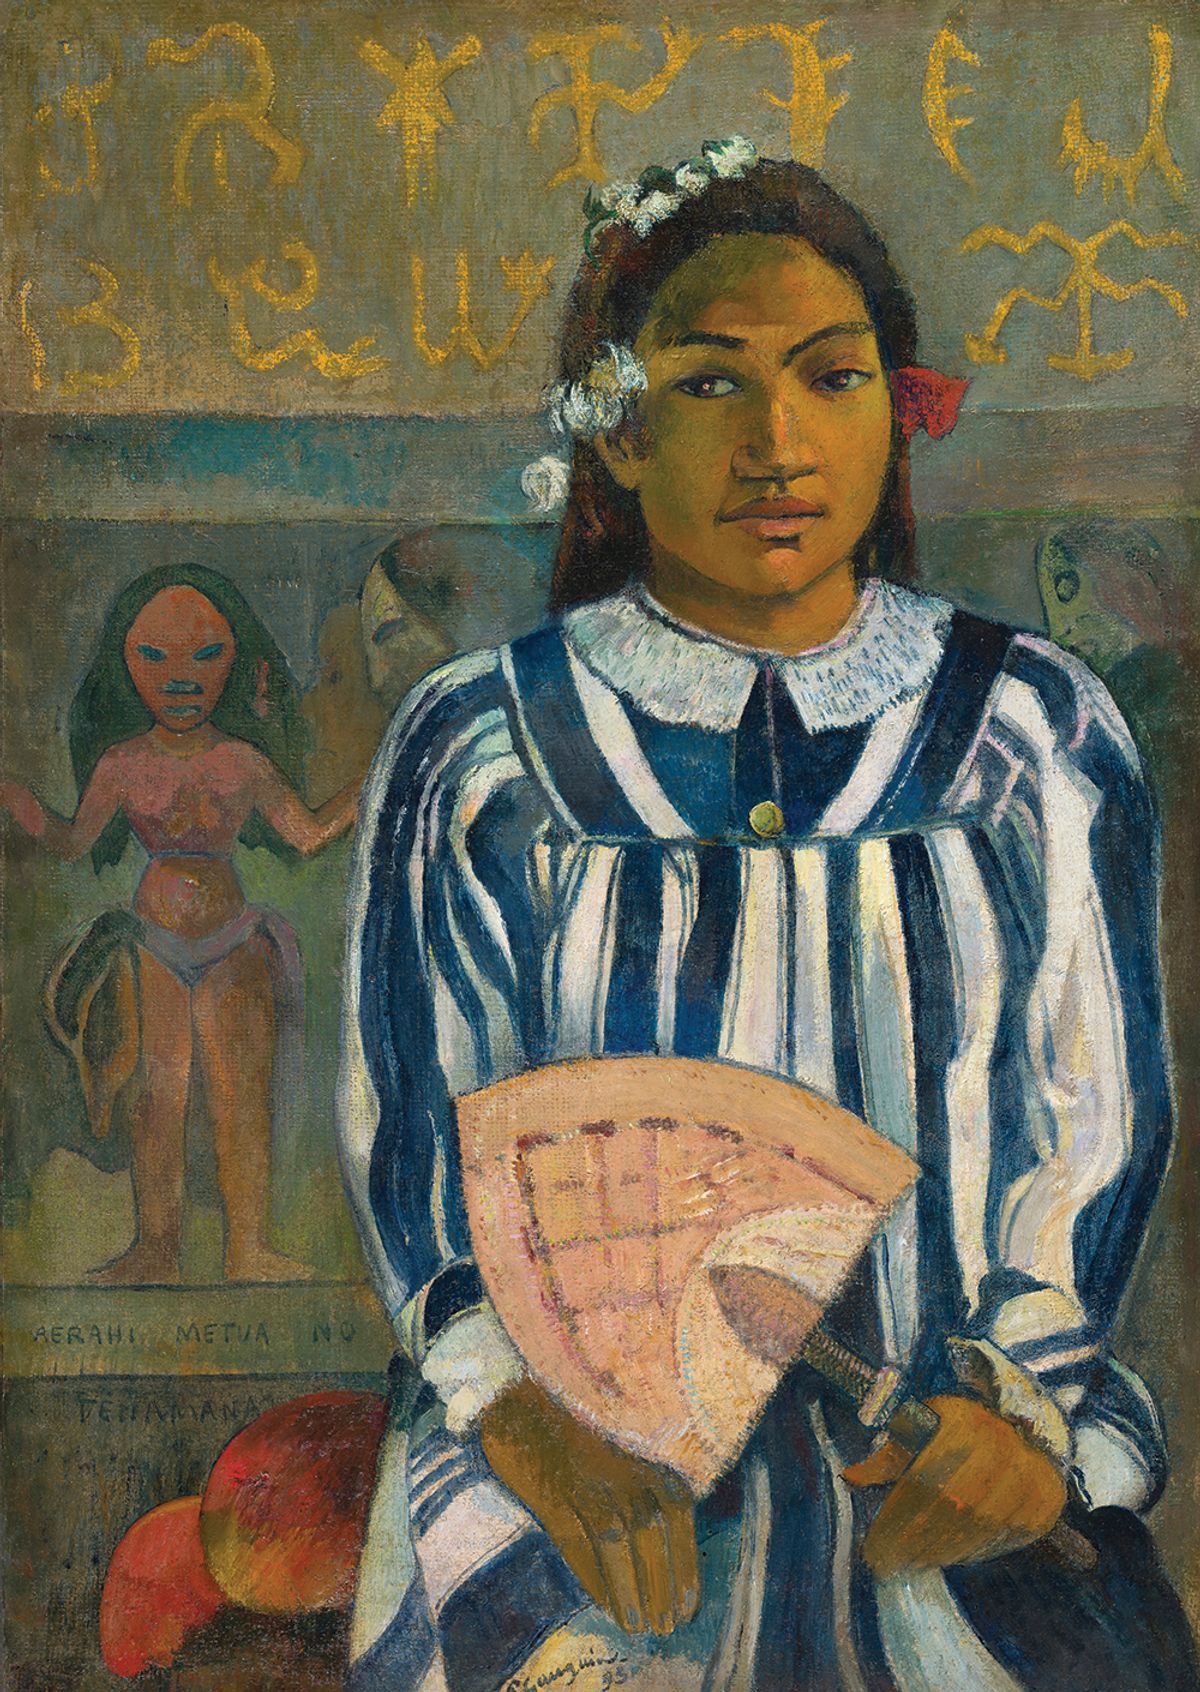 The girl depicted in Gauguin’s portrait Tehamana Has Many Parents (1893), may not be a real 13-year-old with whom he had a relationship; the painting  may instead be an ‘ethnoportrait’ representing  a Polynesian cultural identity © The Art Institute of Chicago/Art Resource